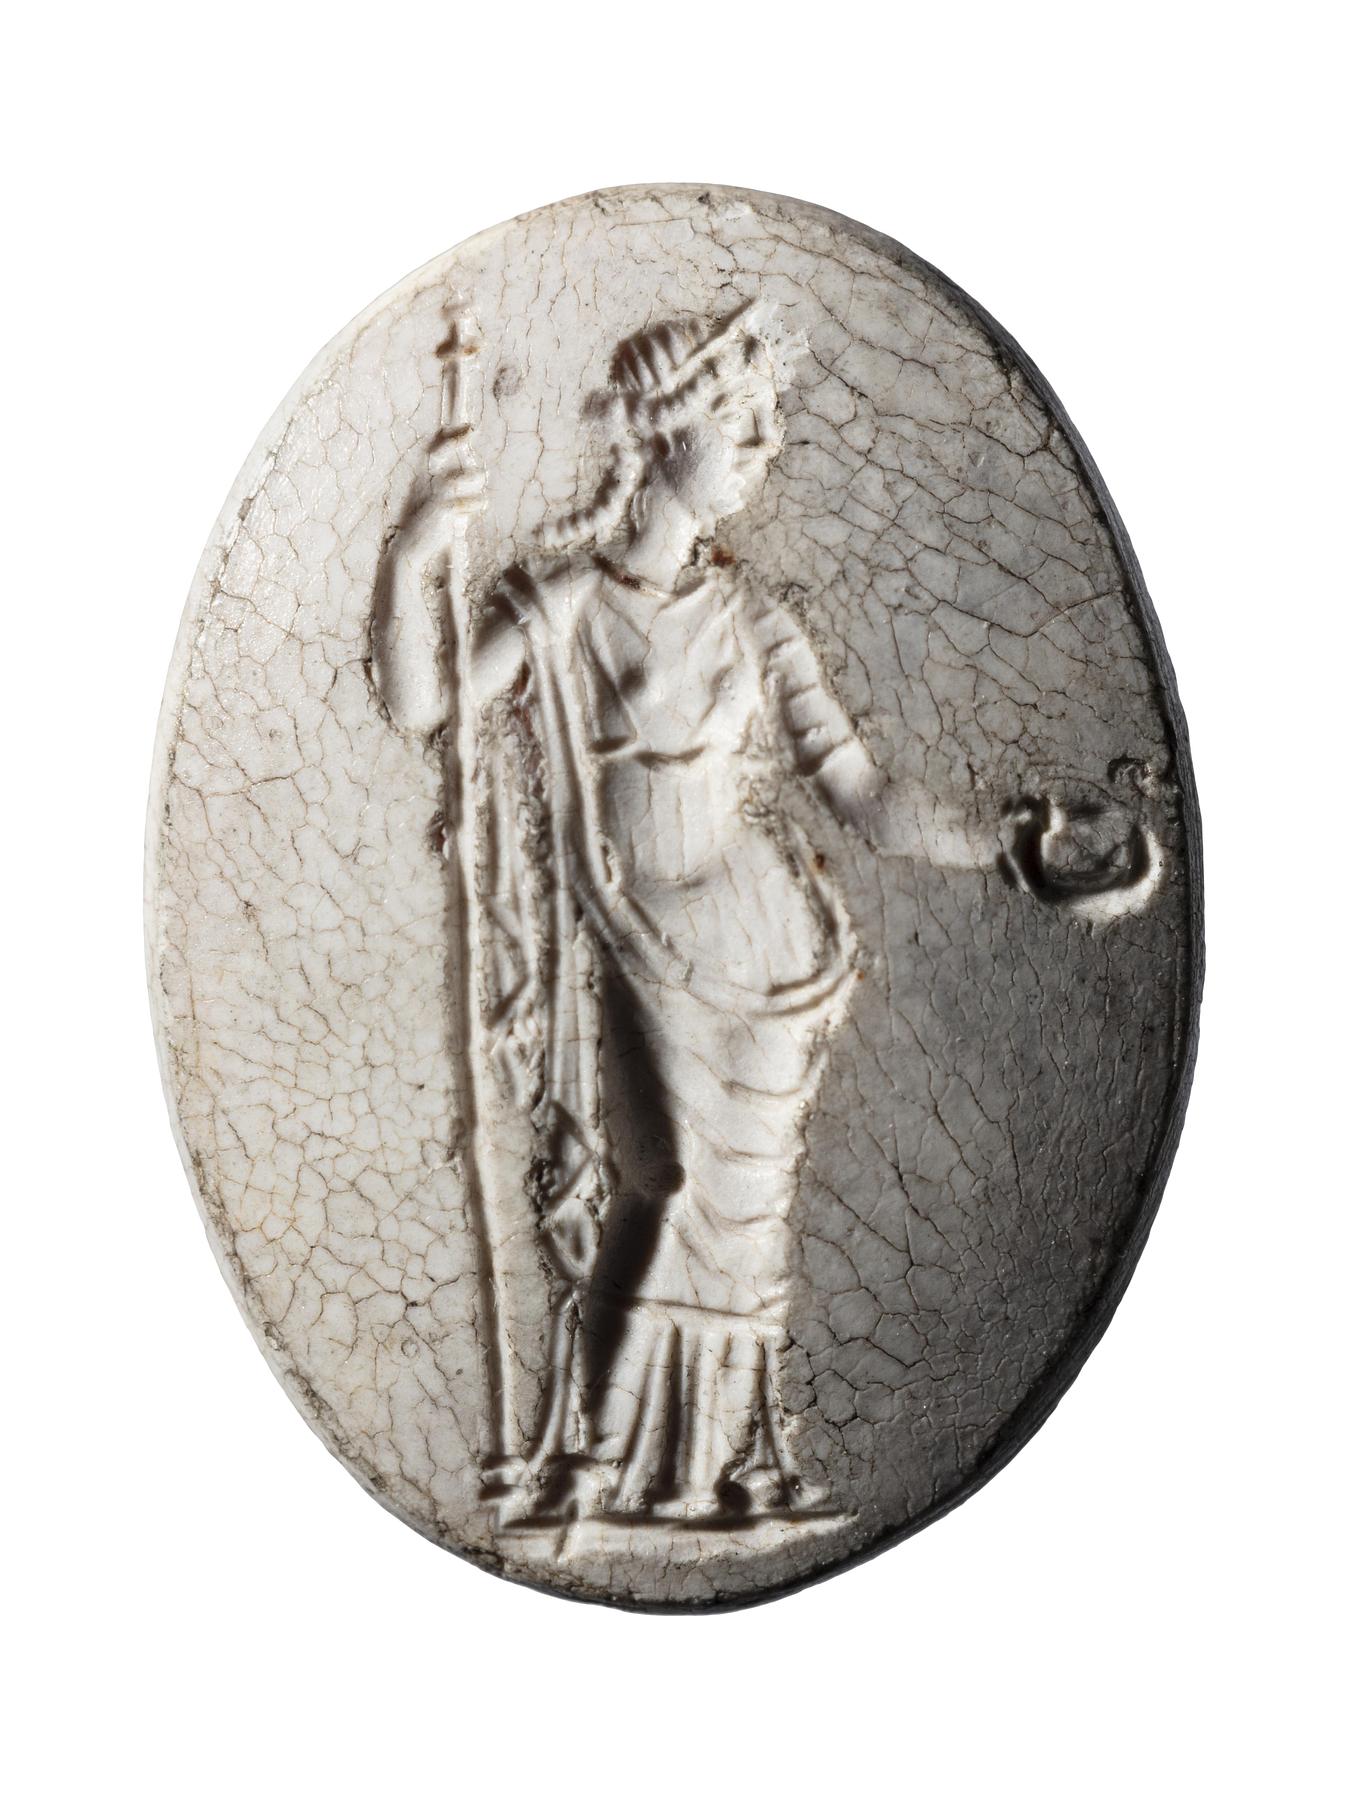 Hera with a libation bowl and scepter, I133